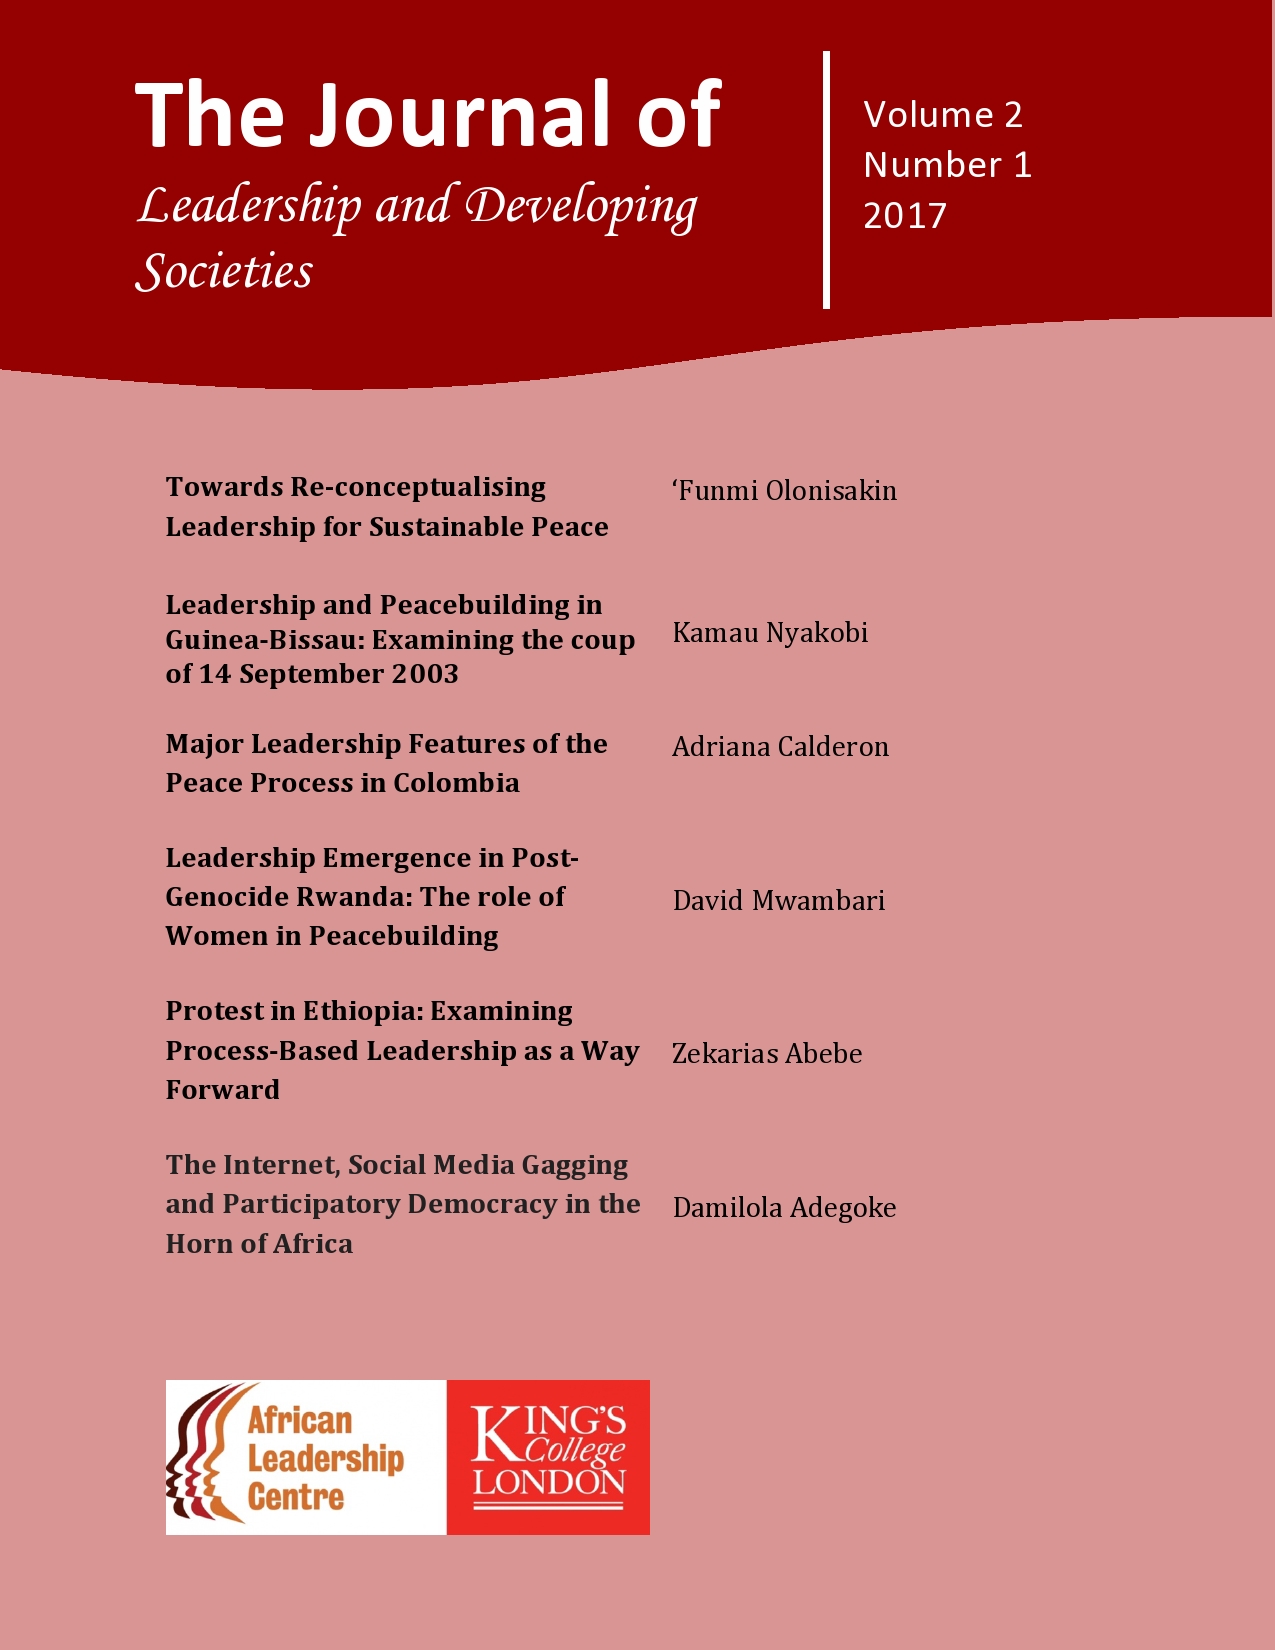 The Journal of Leadership and Developing Societies Volume 2, Number 1 2017